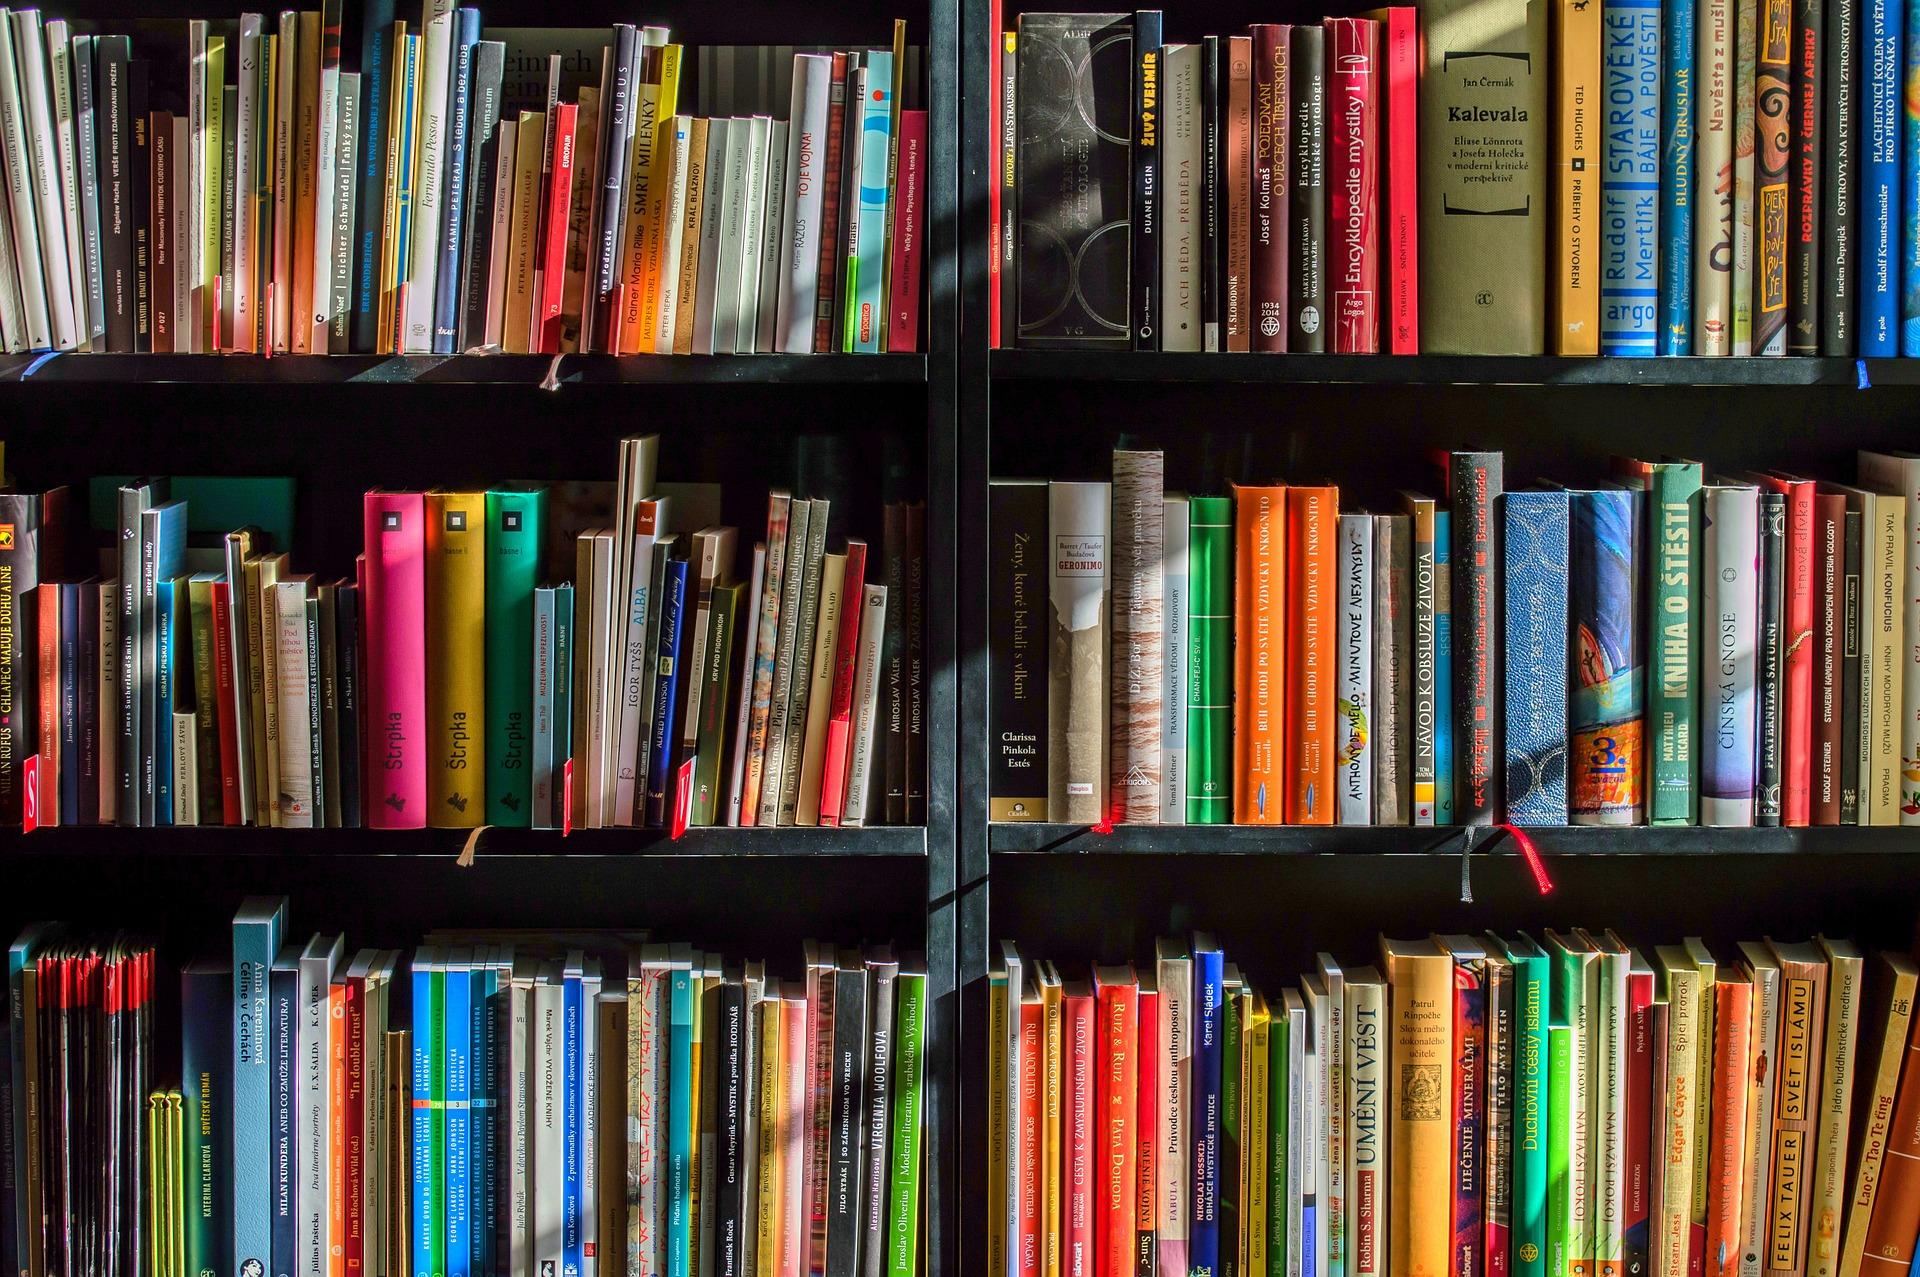 Colorful photograph of books on a shelf